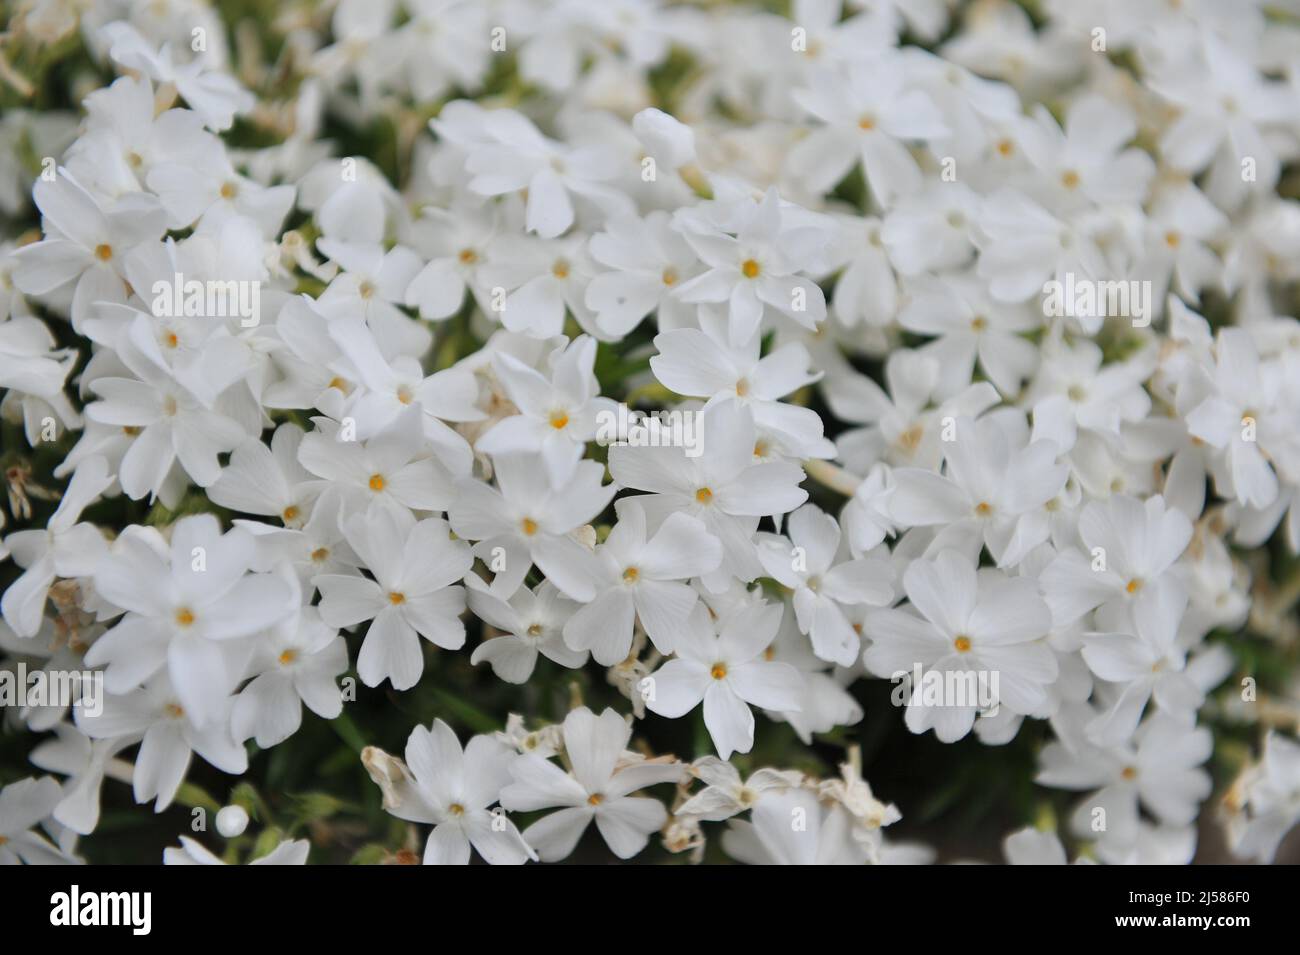 Moss phlox (Phlox subulata) White Delight bloom in a garden in May Stock Photo